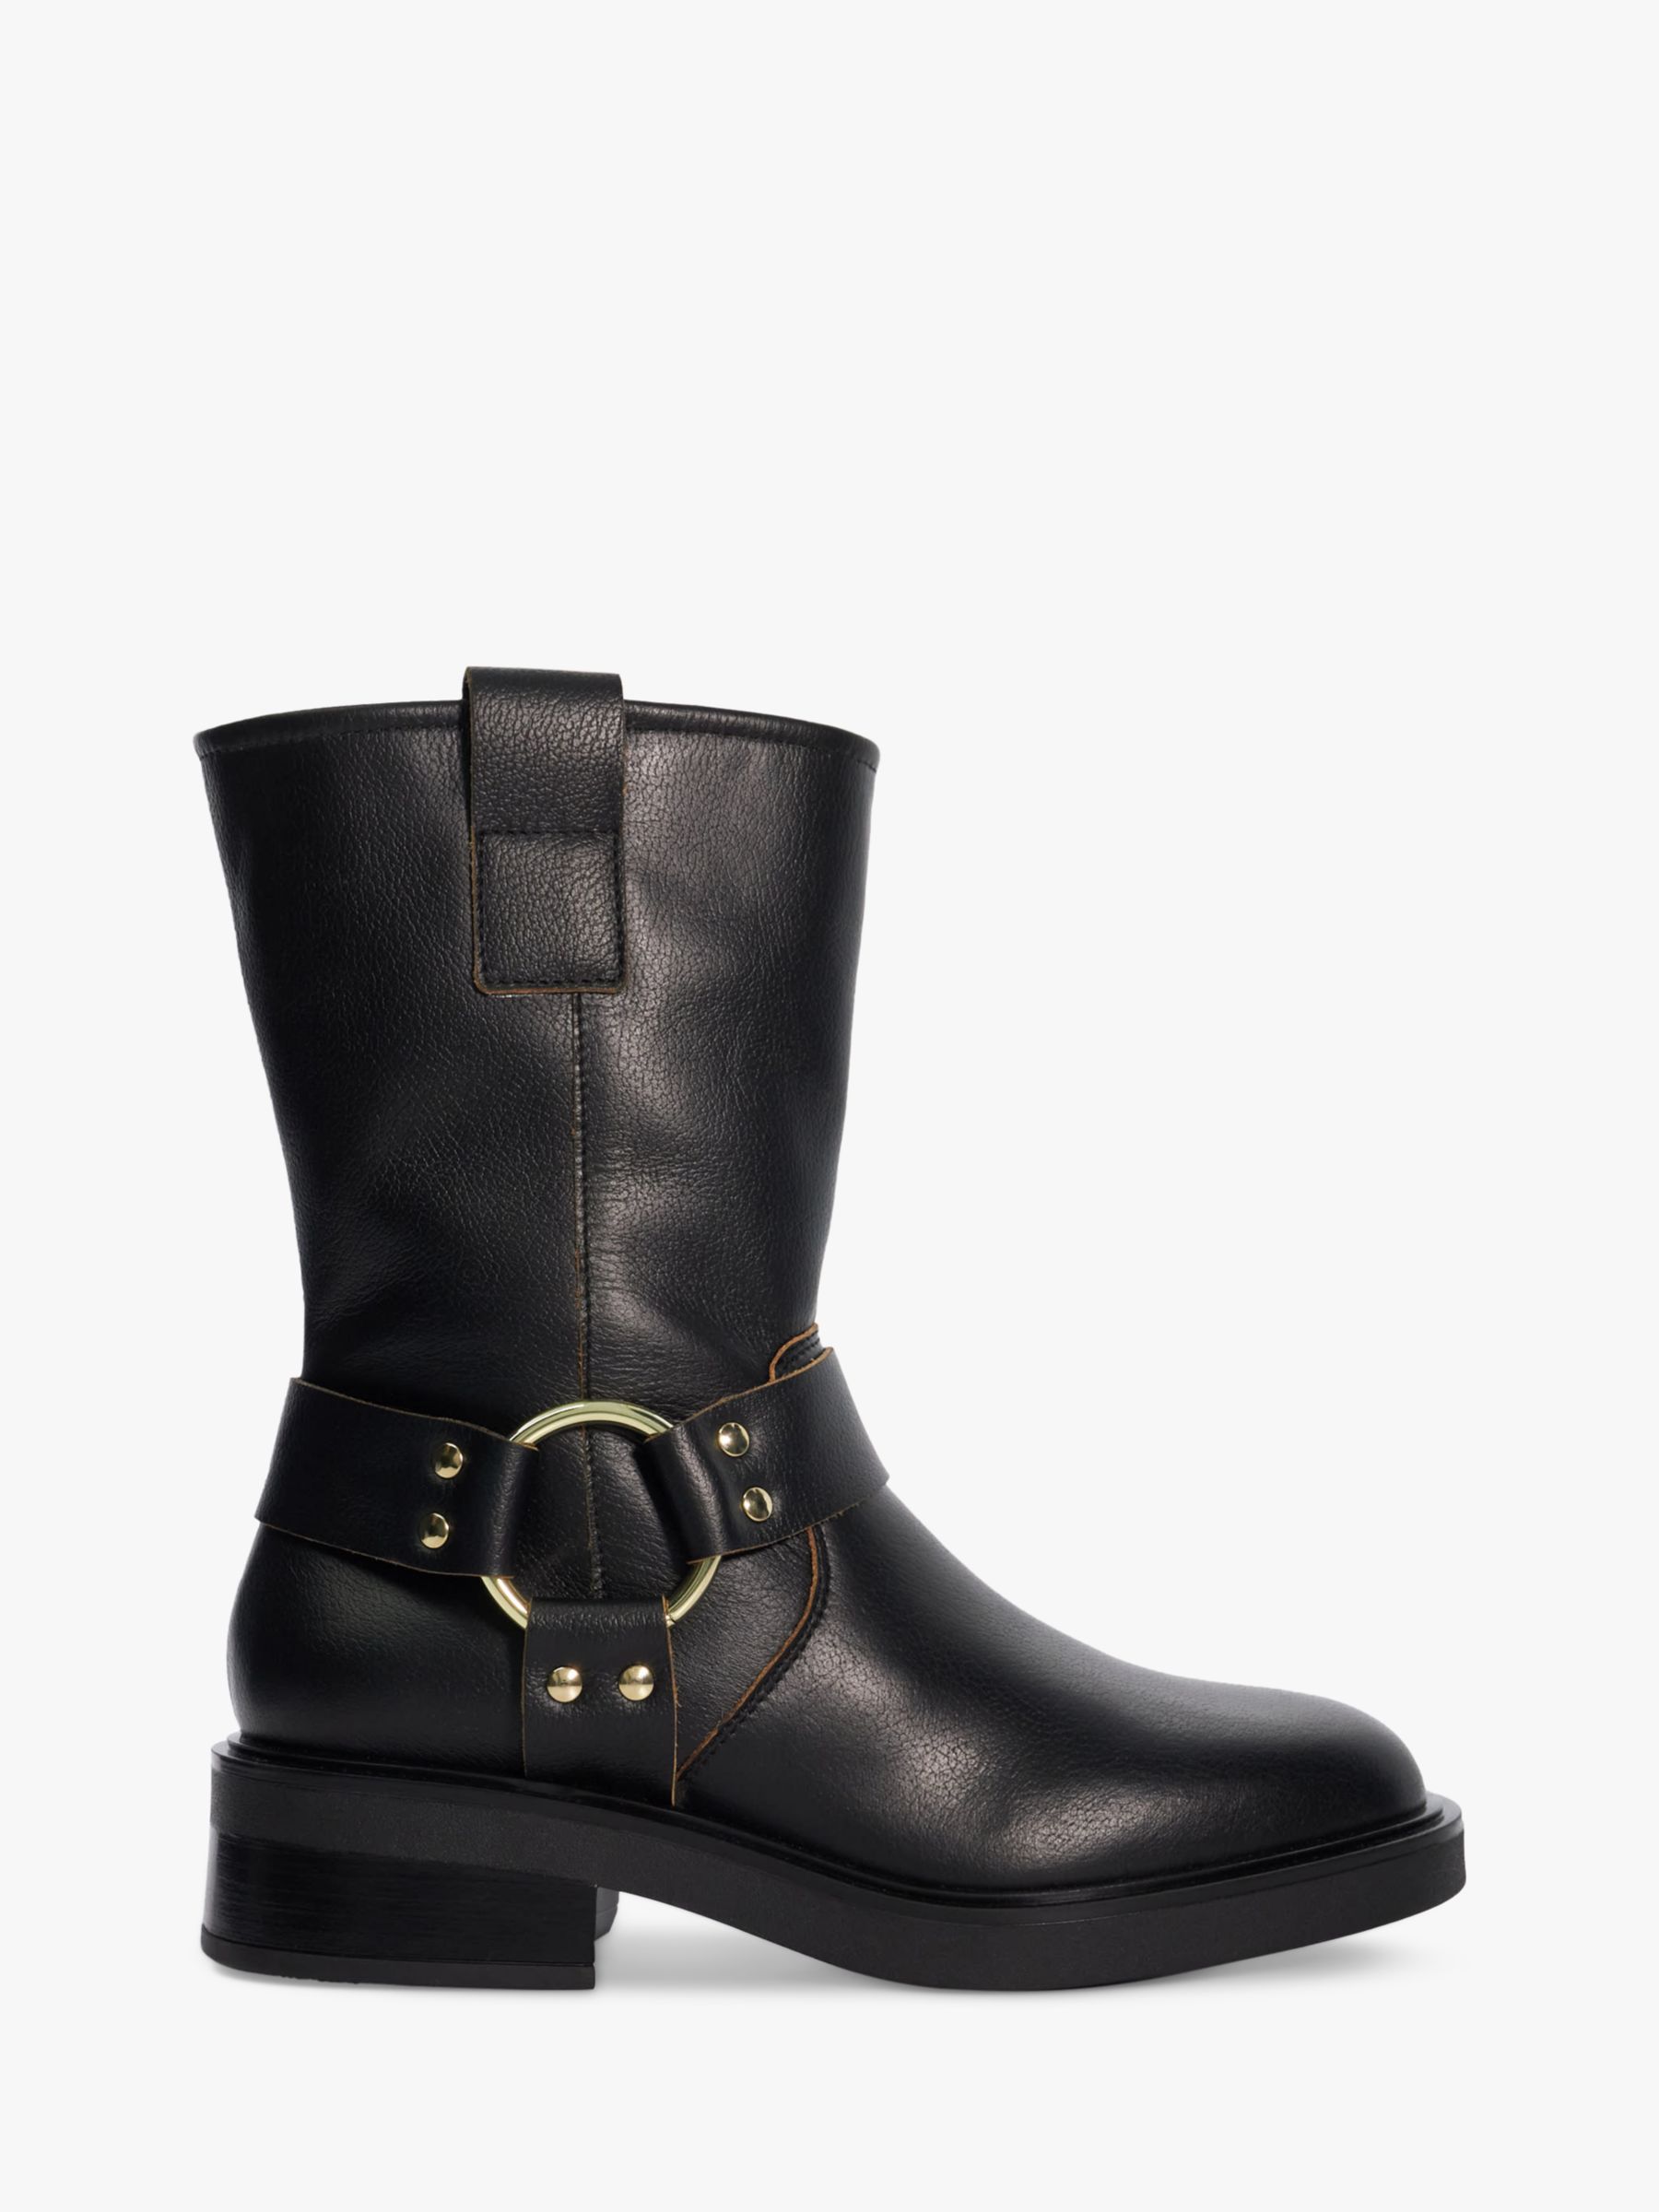 Dune Pally Leather Low Biker Boots, Black at John Lewis & Partners